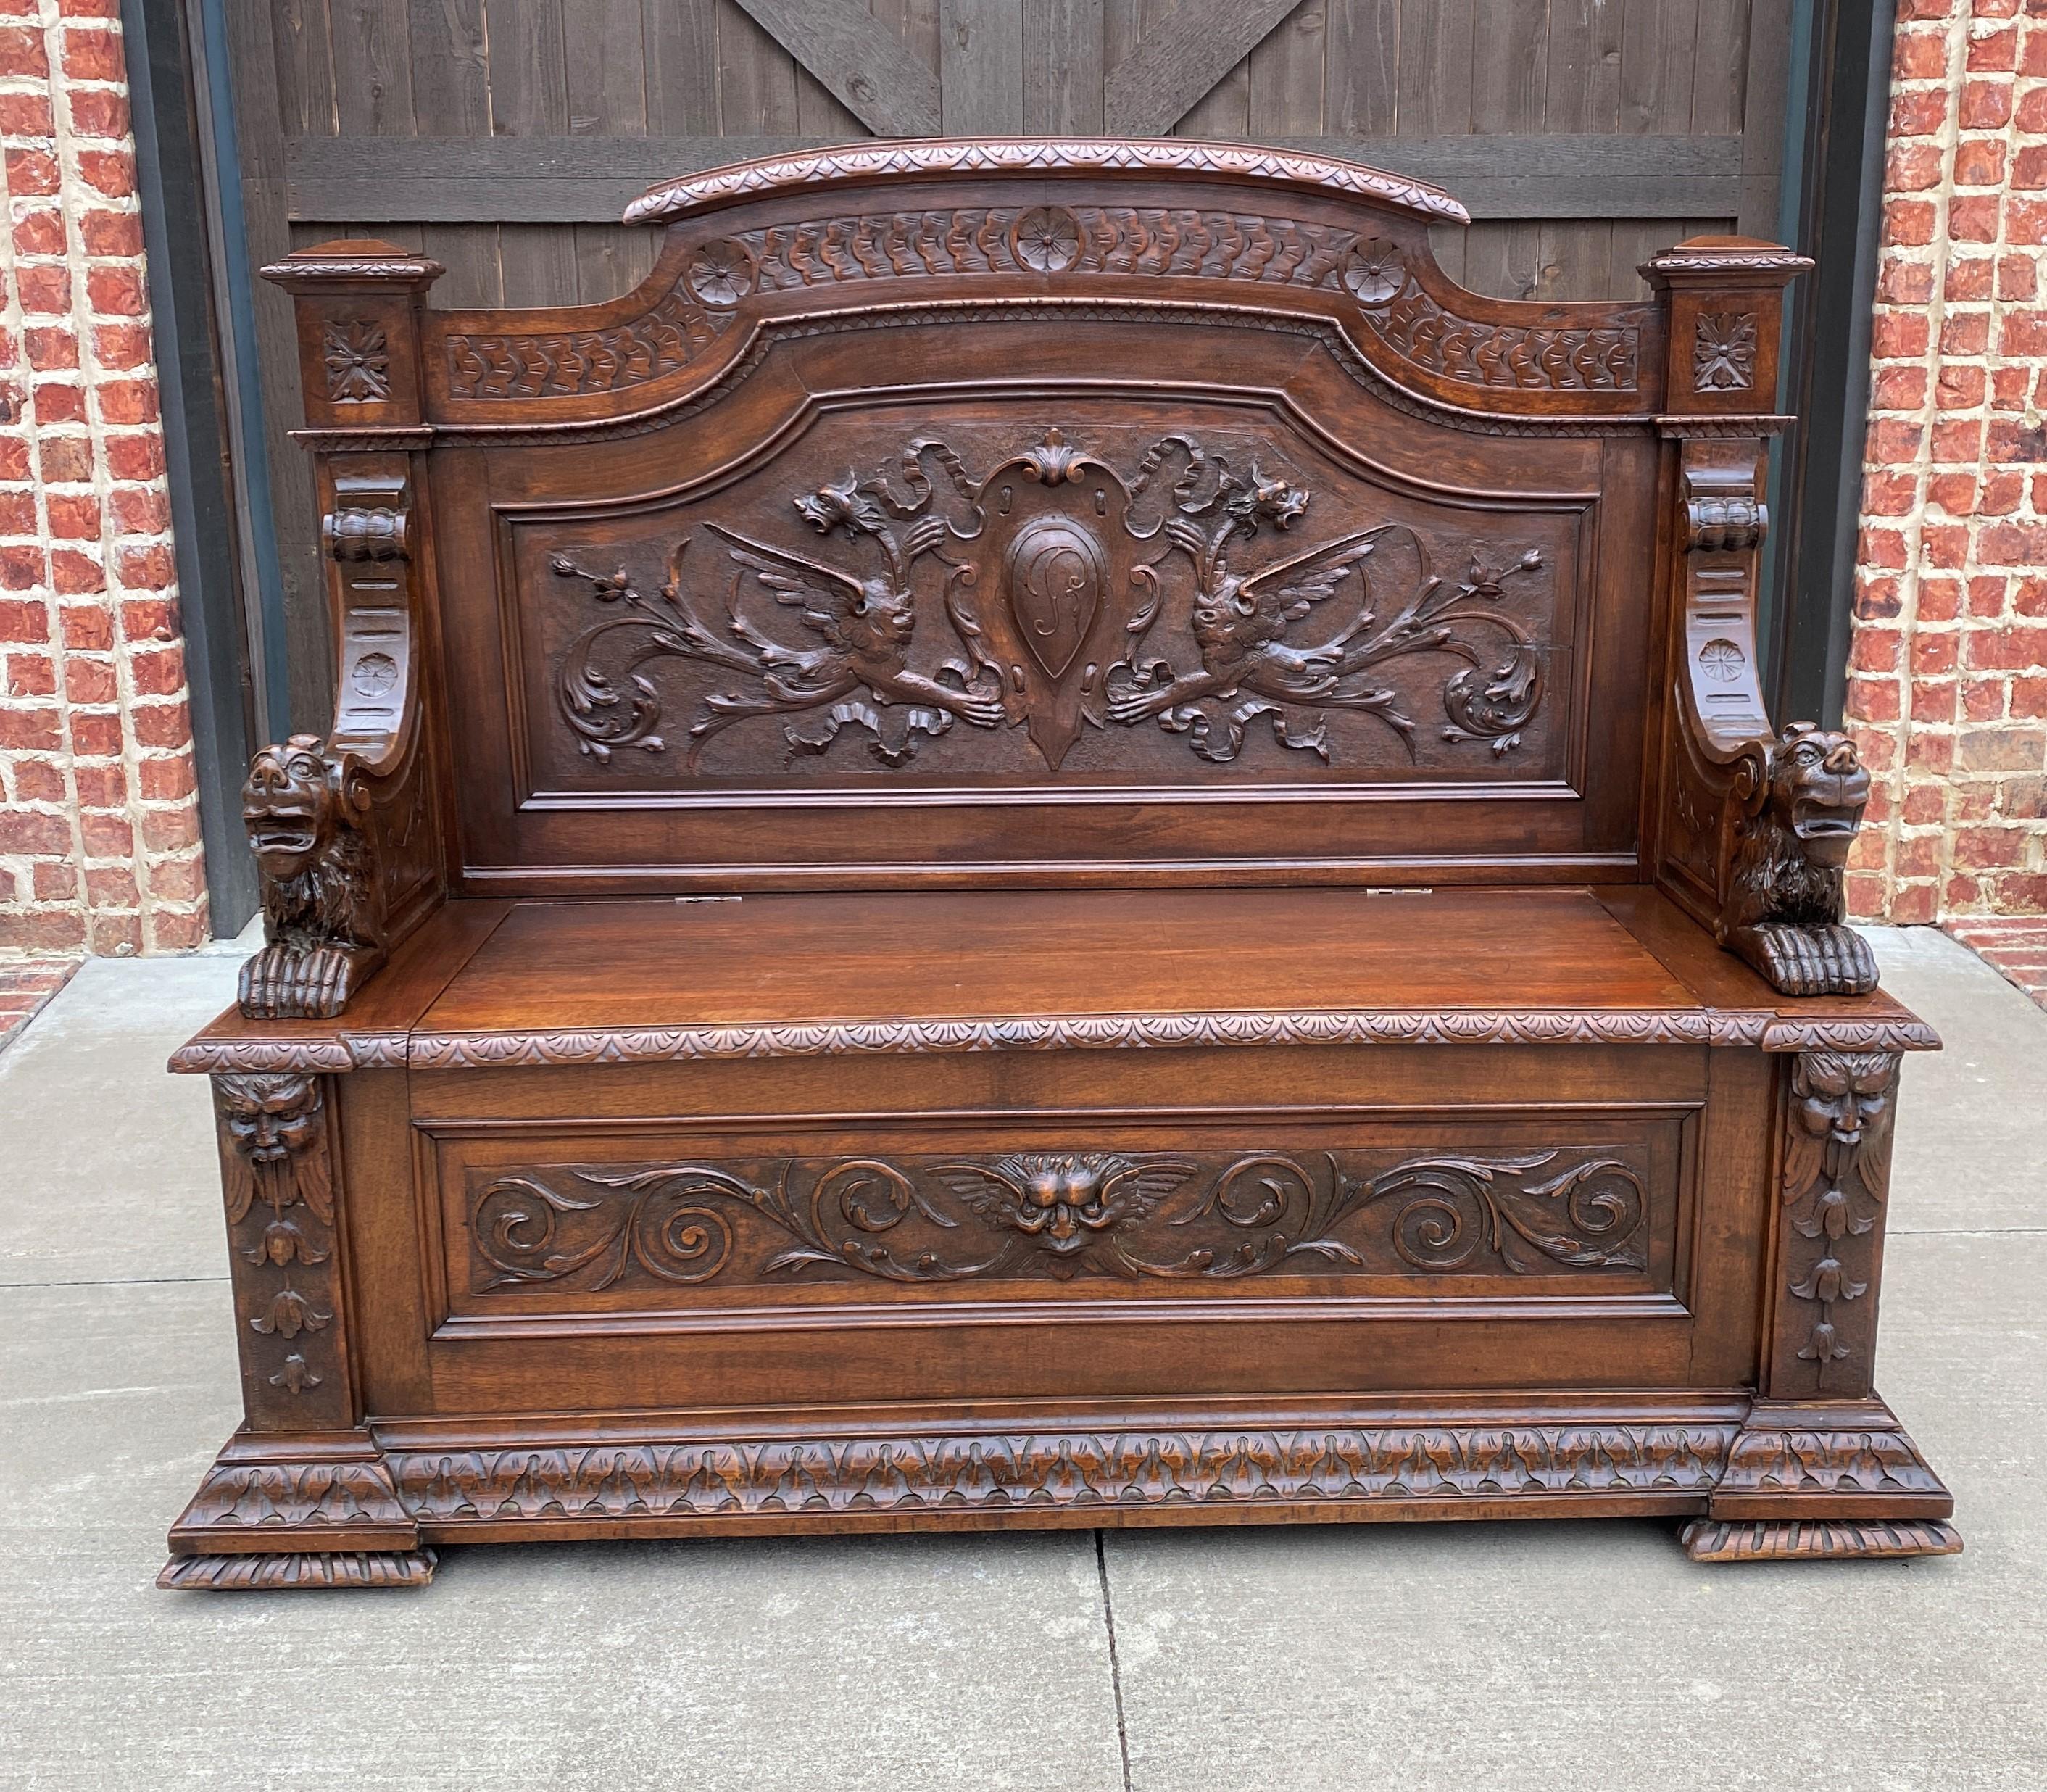 Beautiful carved oak Antique Italian Renaissance revival bench or settee with lift top seat~~c. 1880s

Highly carved~~these benches are always in high demand

Versatile piece with so many functions~~use as a traditional entry or hall bench,